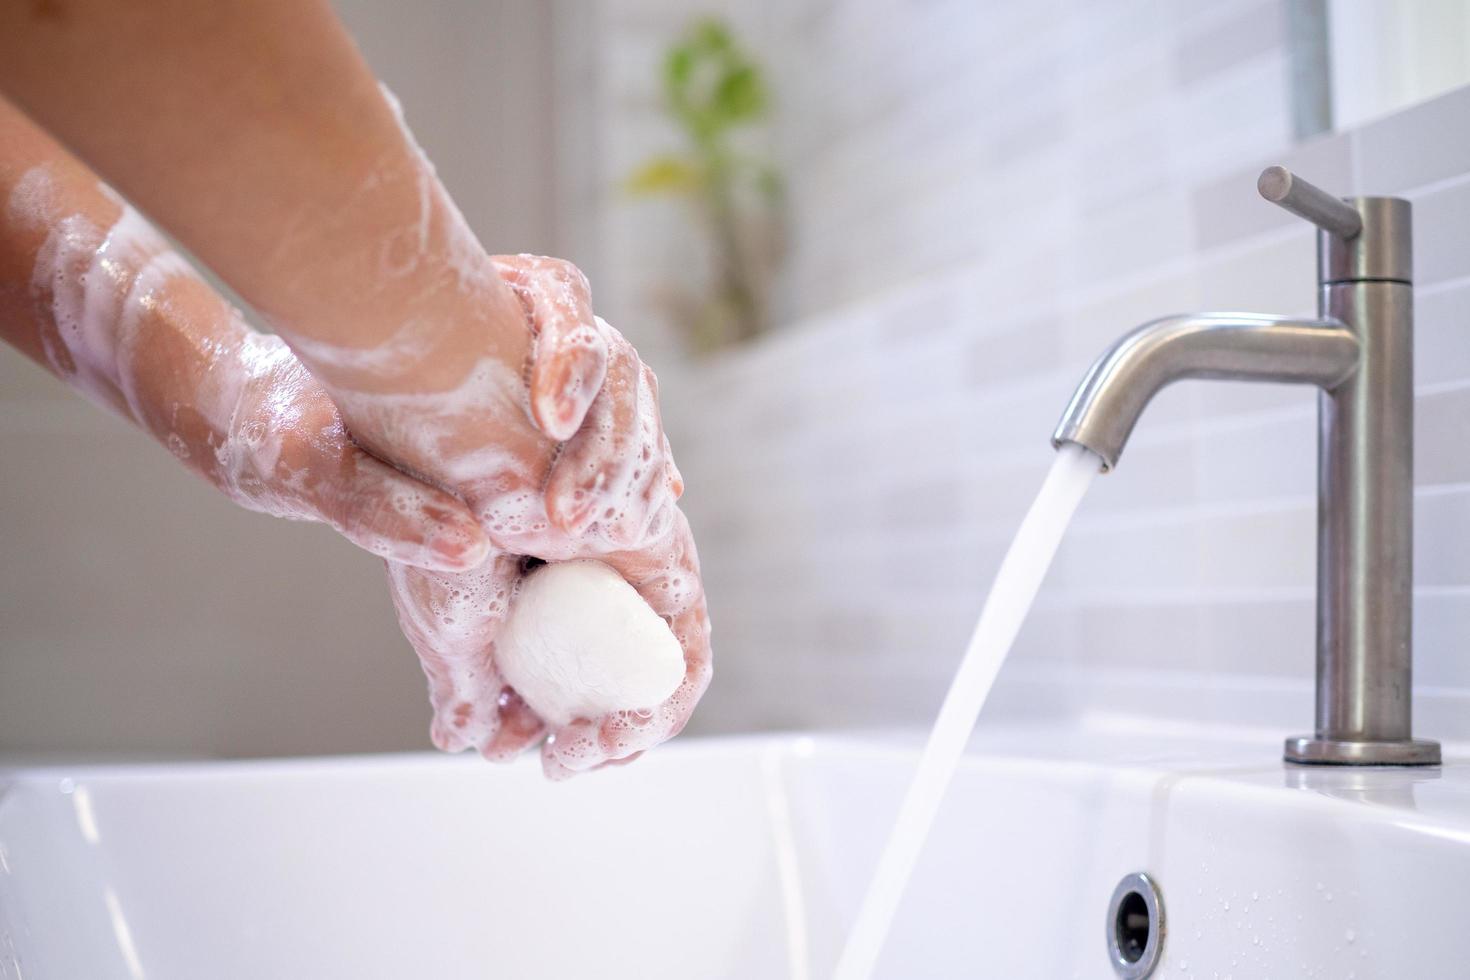 https://static.vecteezy.com/system/resources/previews/017/342/423/non_2x/women-wash-their-hands-with-soap-on-the-bathroom-sinks-frequent-washing-can-help-protect-against-covid-19-viruses-free-photo.jpg